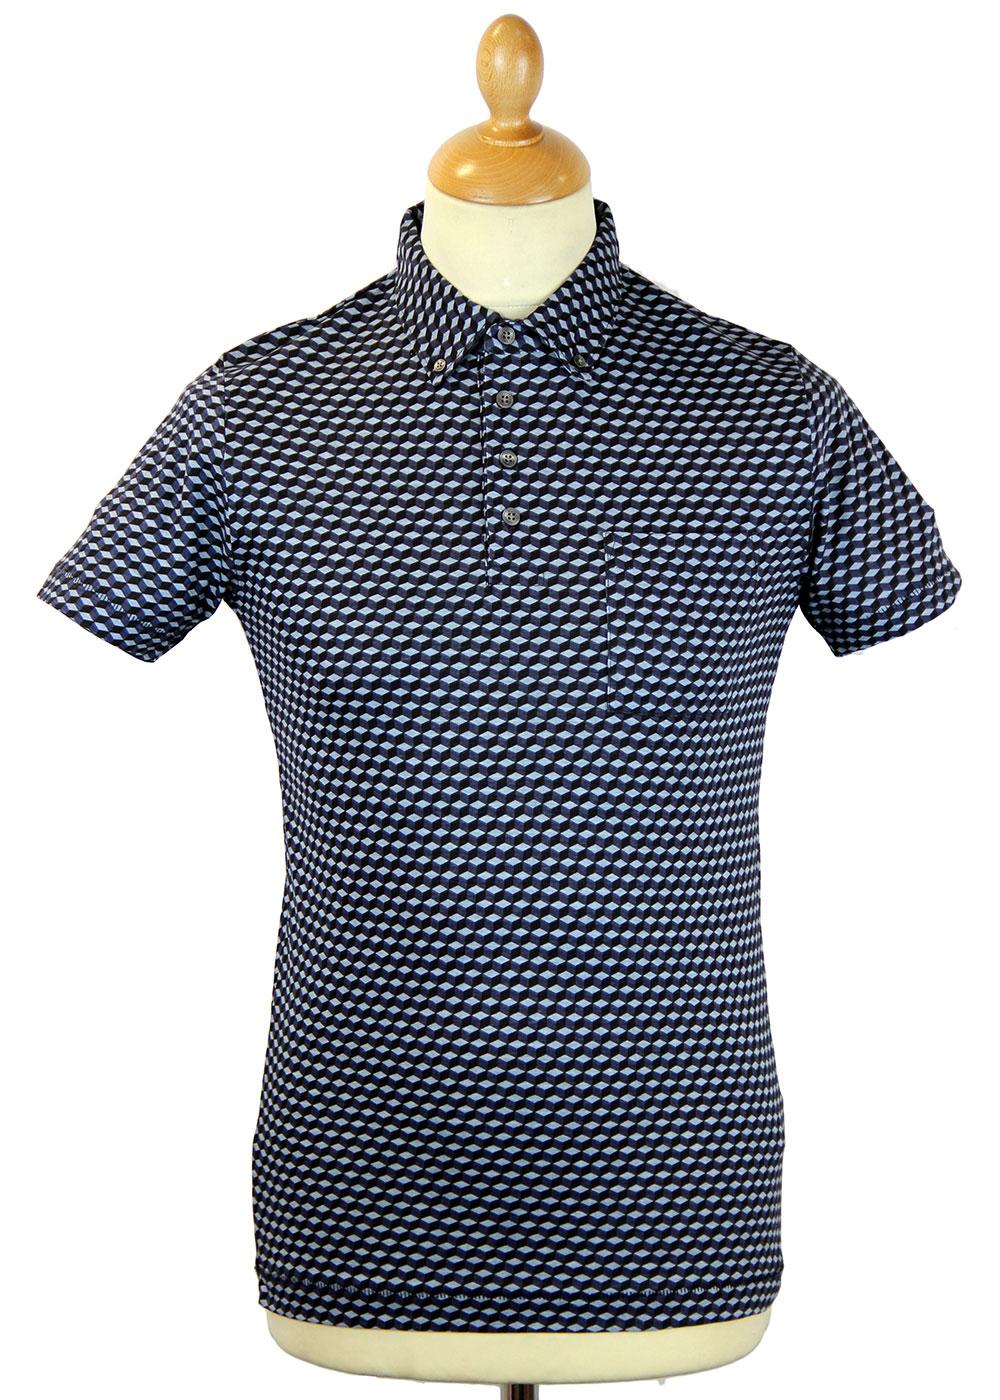 FRENCH CONNECTION Geometric Cube Print Retro Polo